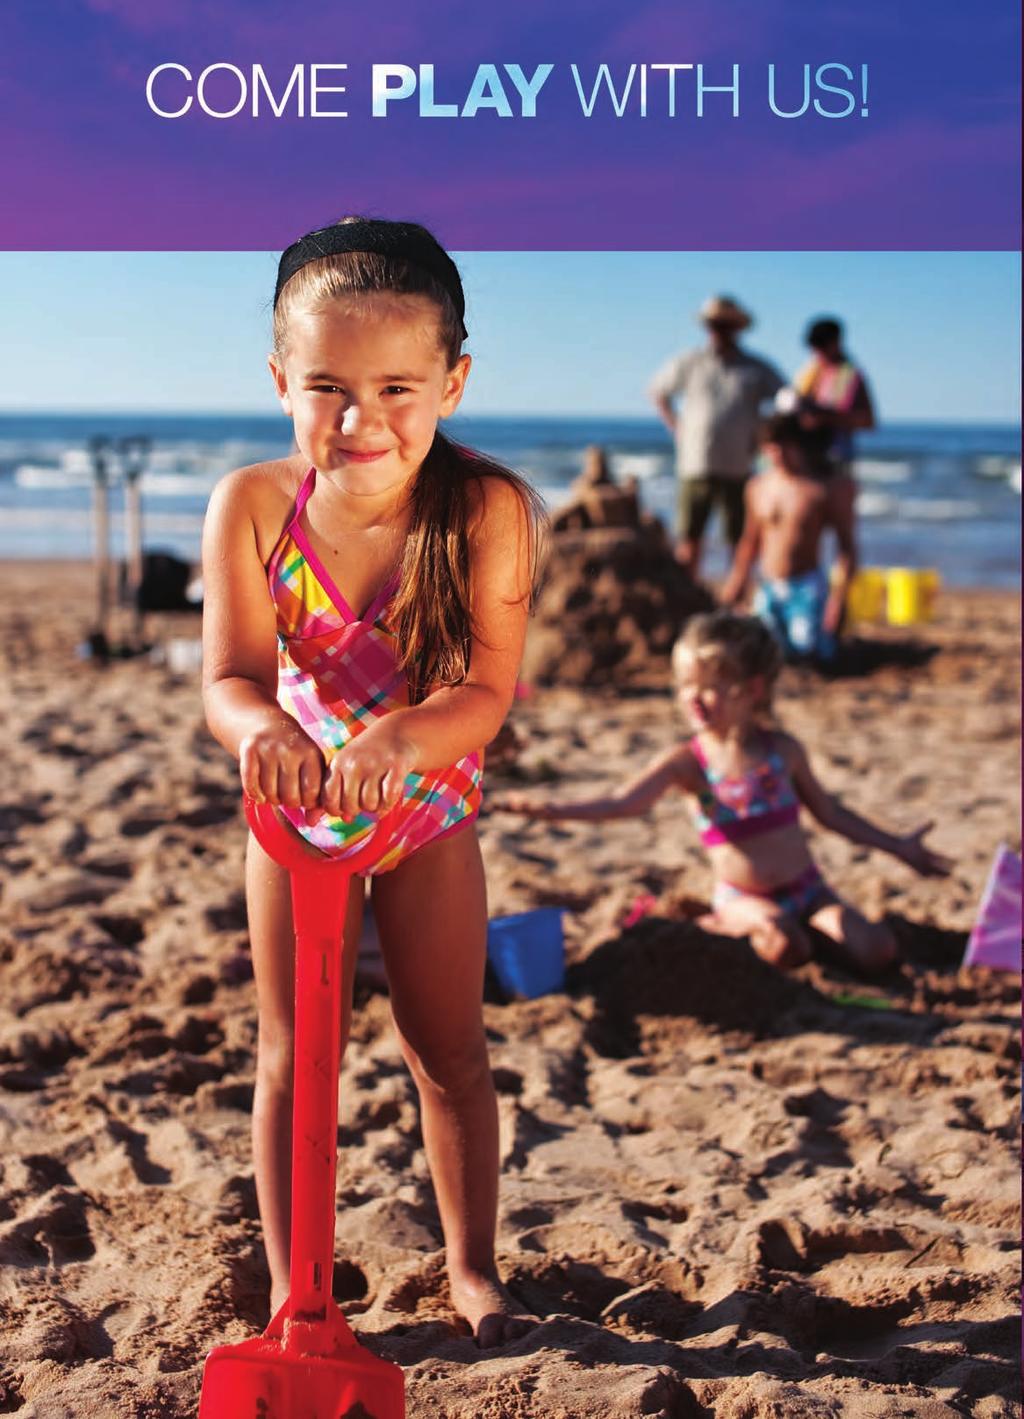 17 Summer Fun Schedule Prince Edward Island National Park has fun discovery programs for all ages in the months of July and August.